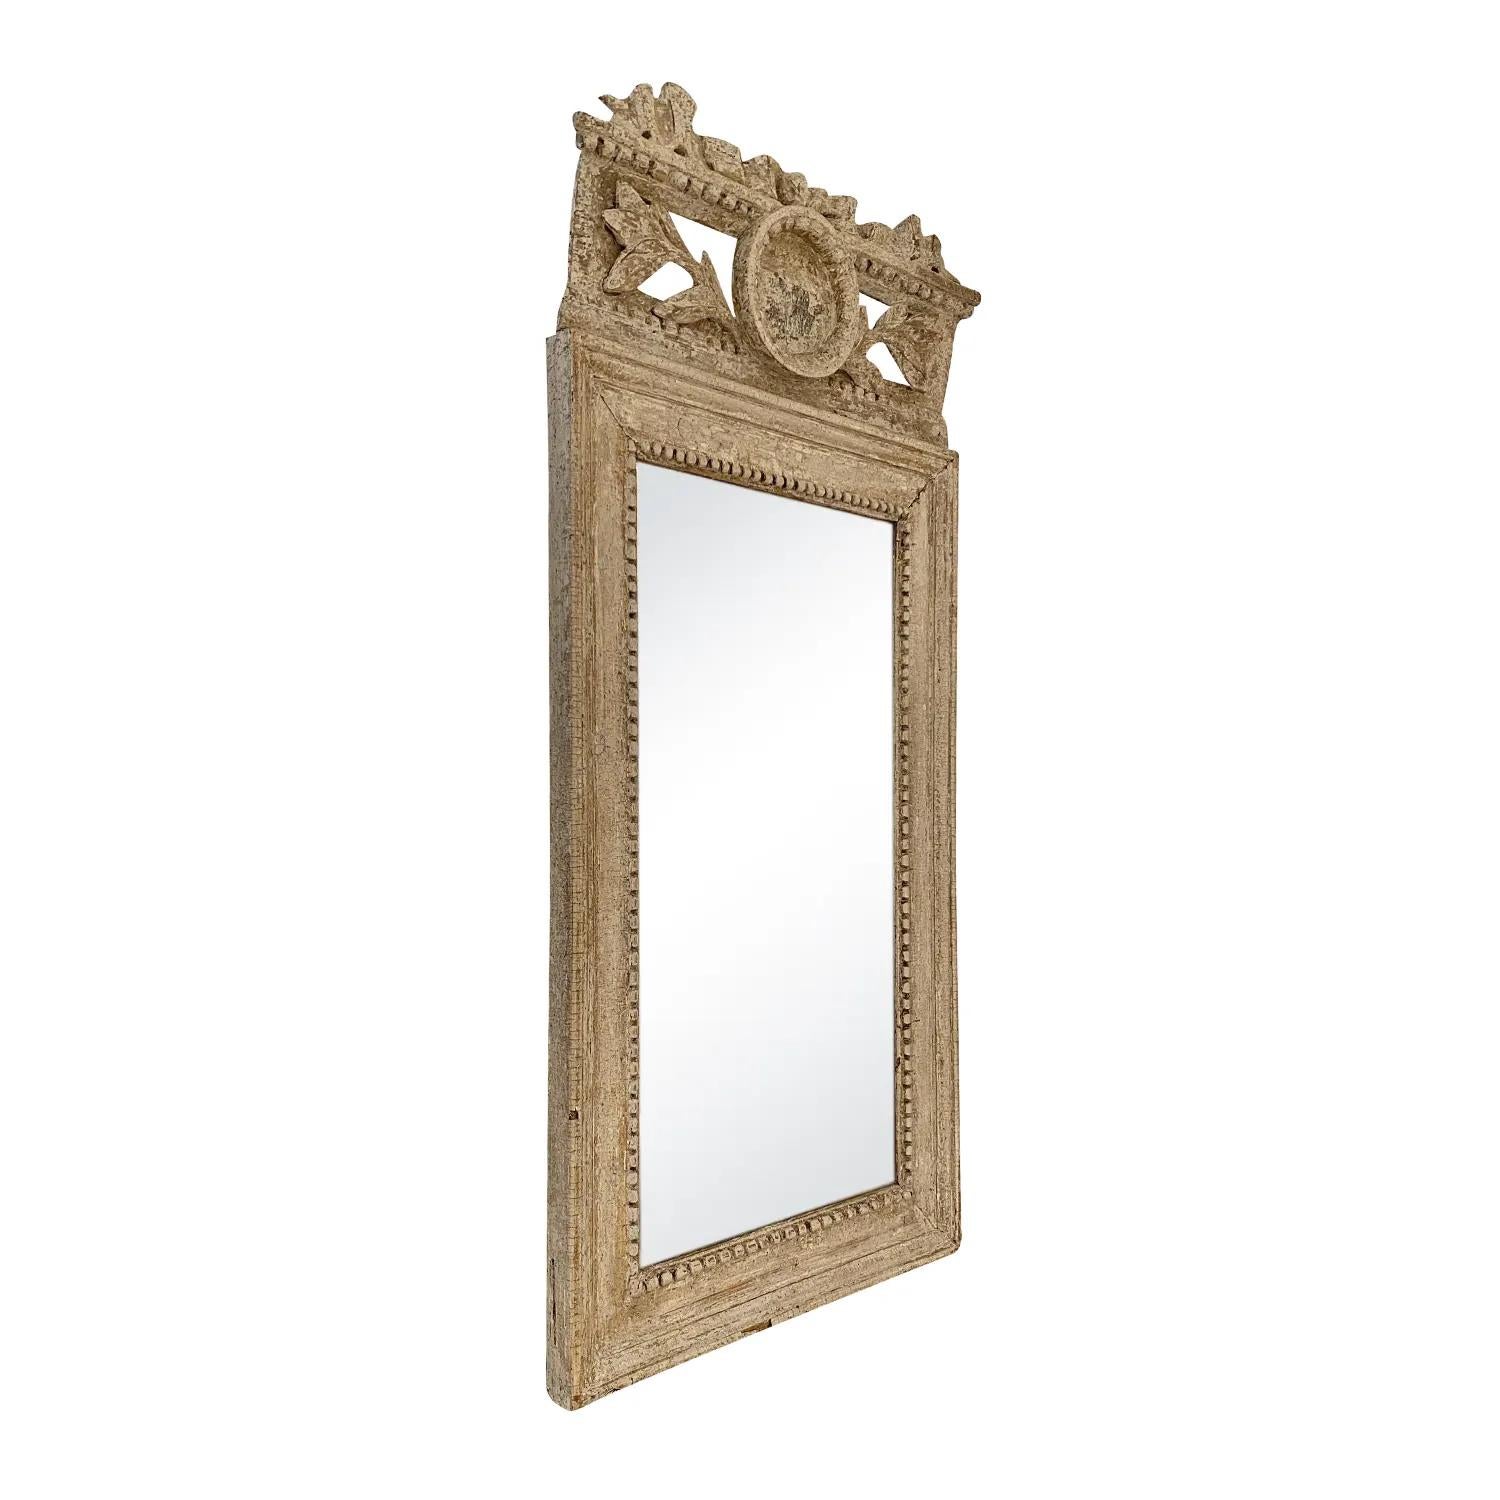 A light-grey, white antique Swedish Gustavian wall mirror made of hand carved pinewood with its original mirrored glass, in good condition. The particularized Scandinavian wall décor piece is enhanced by detailed flower carvings and fittings. Wear